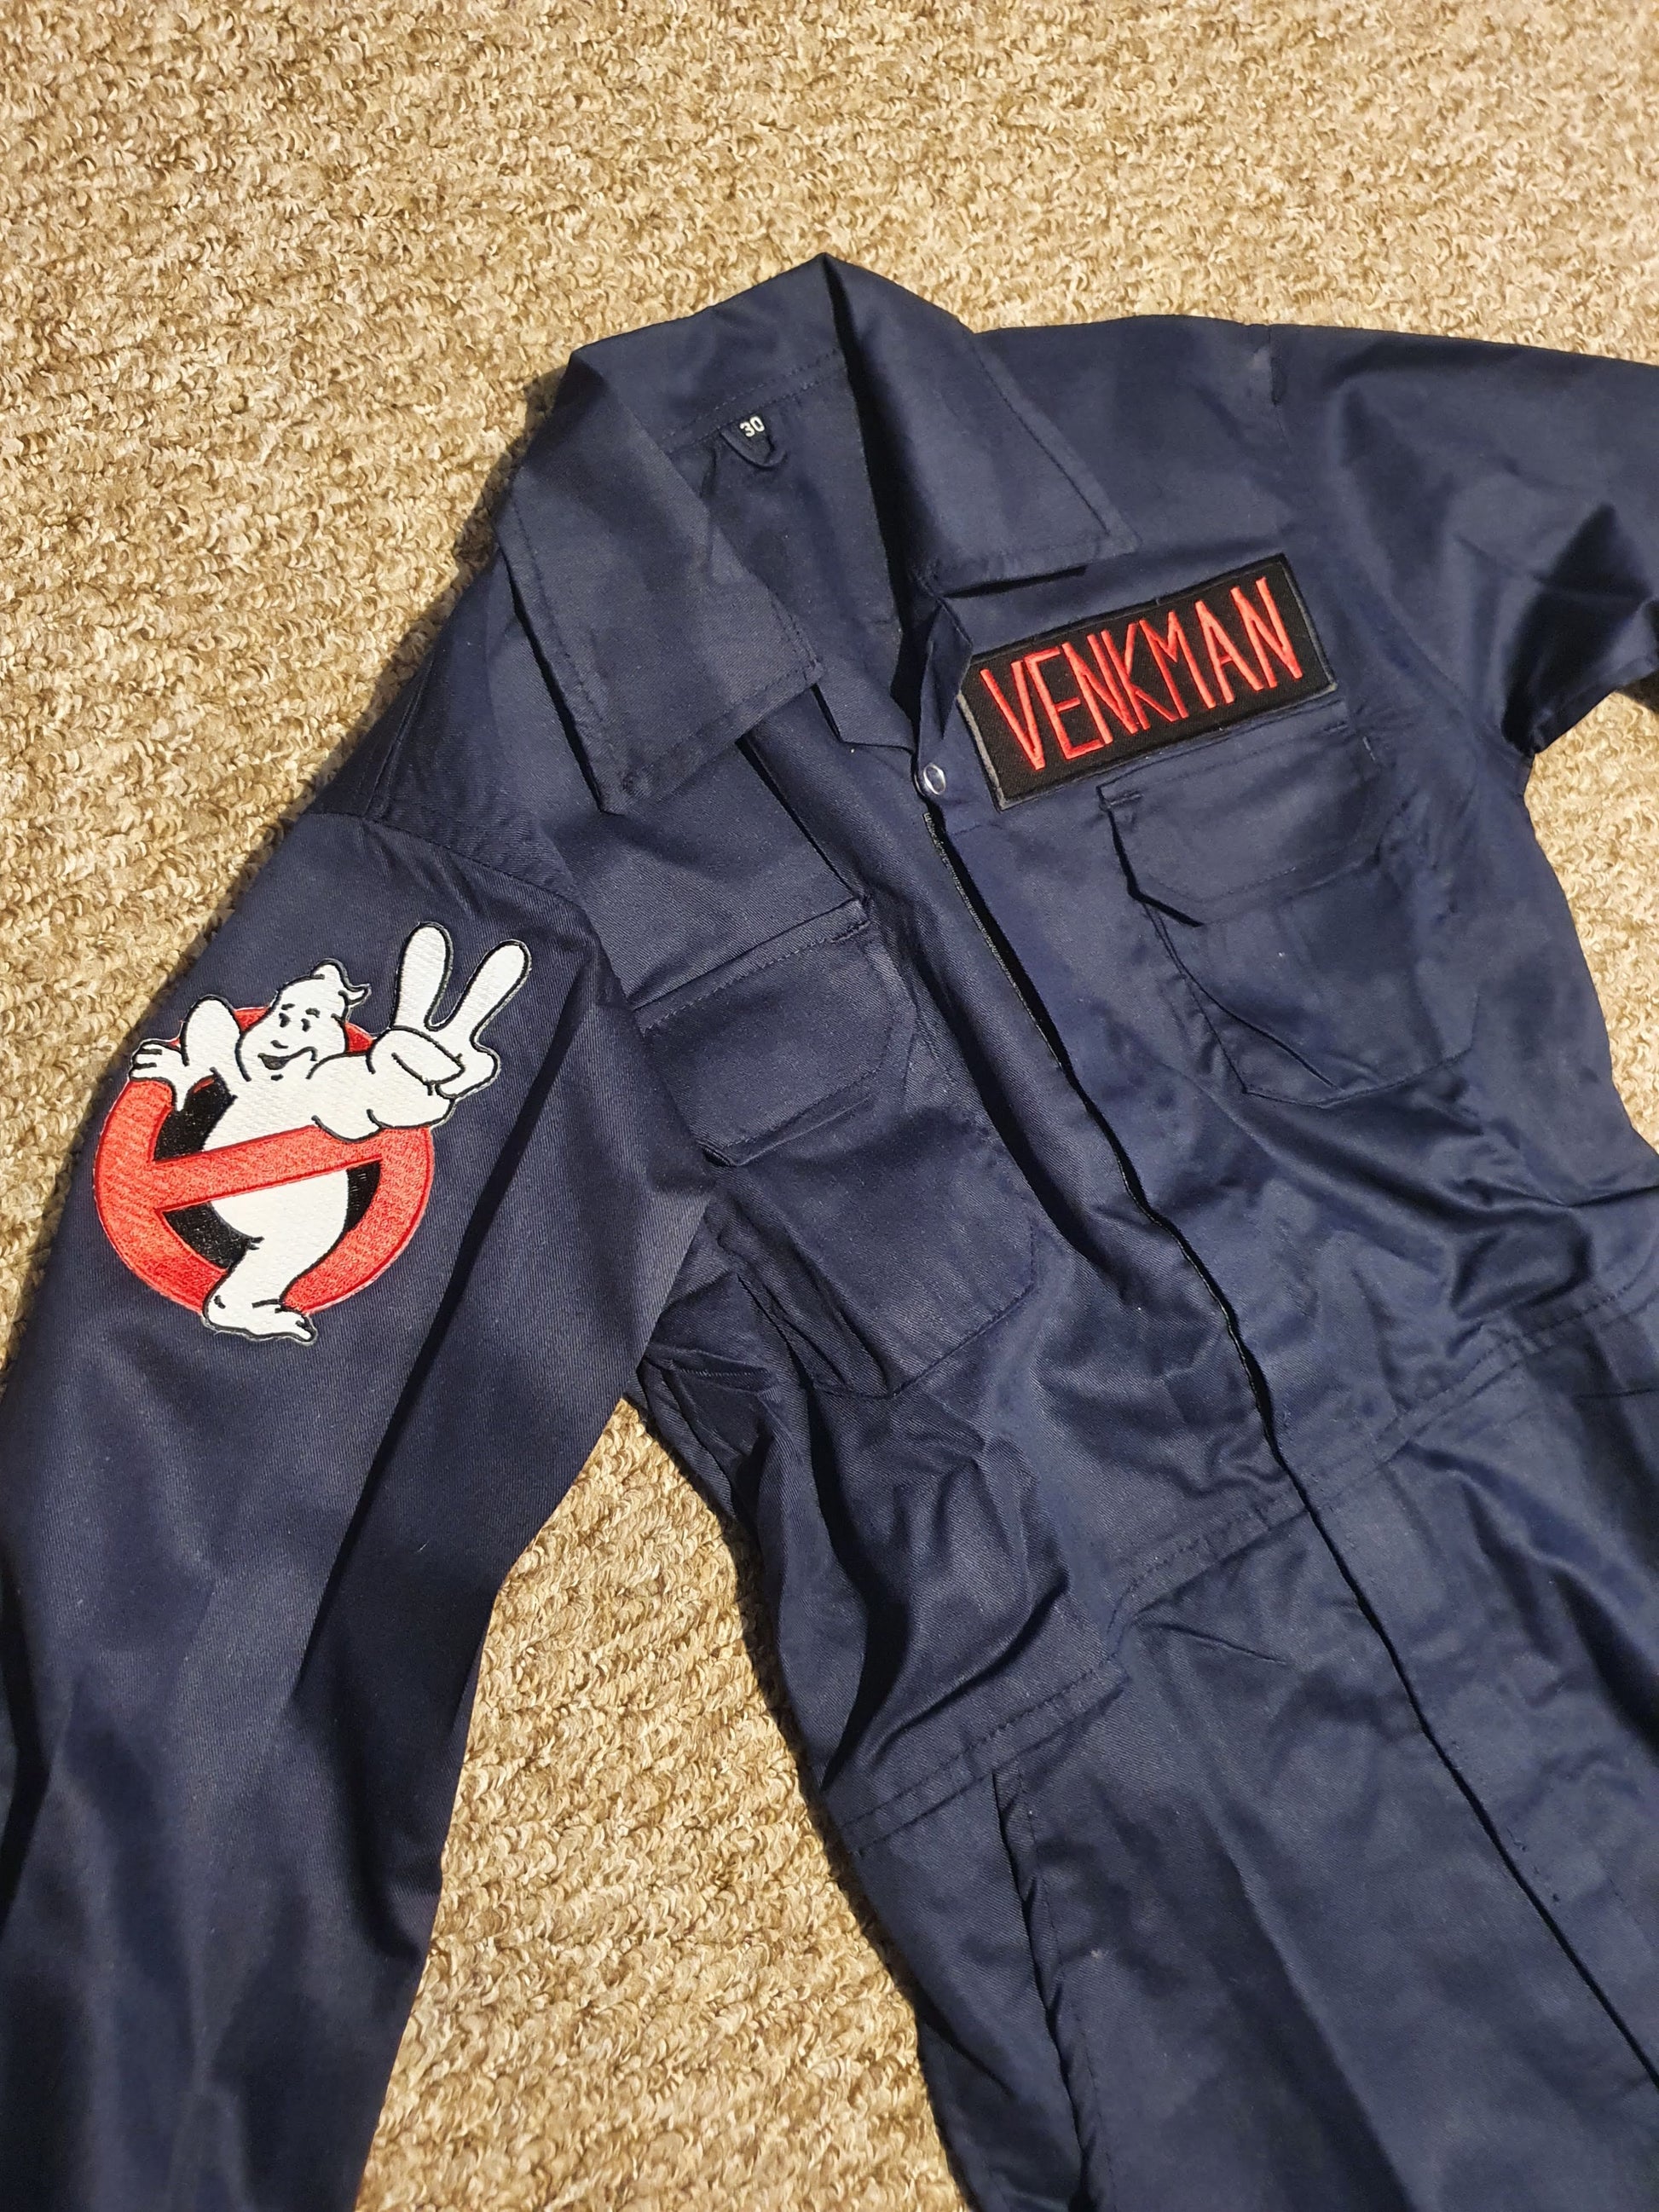 Ghostbusters Jacket Patch -  Canada